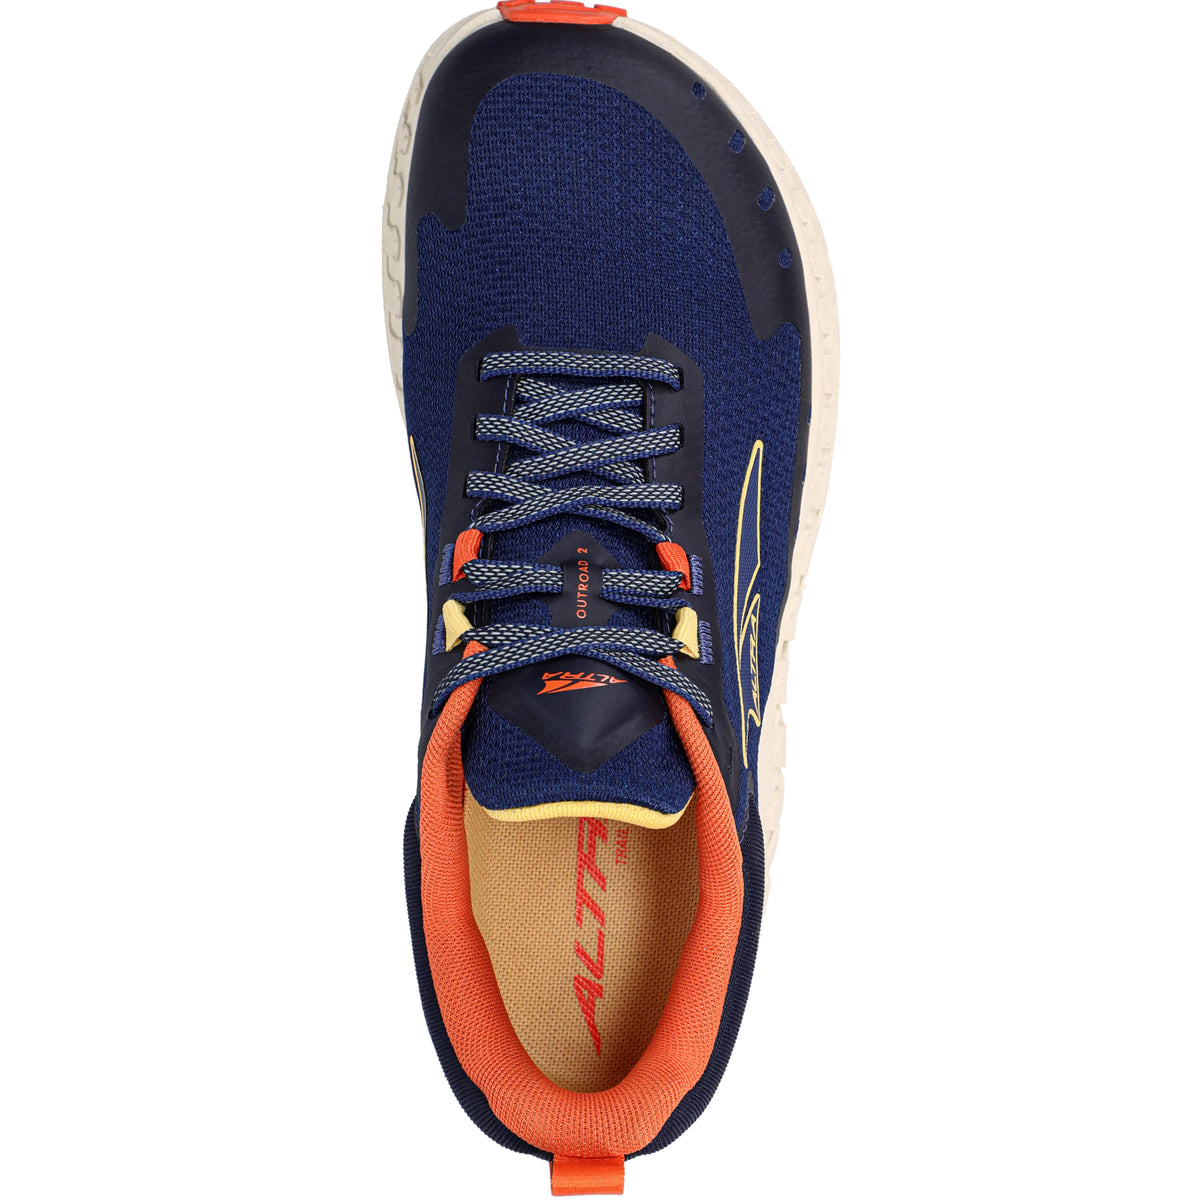 Altra Outroad 2 Trail-Running Shoes - Women's